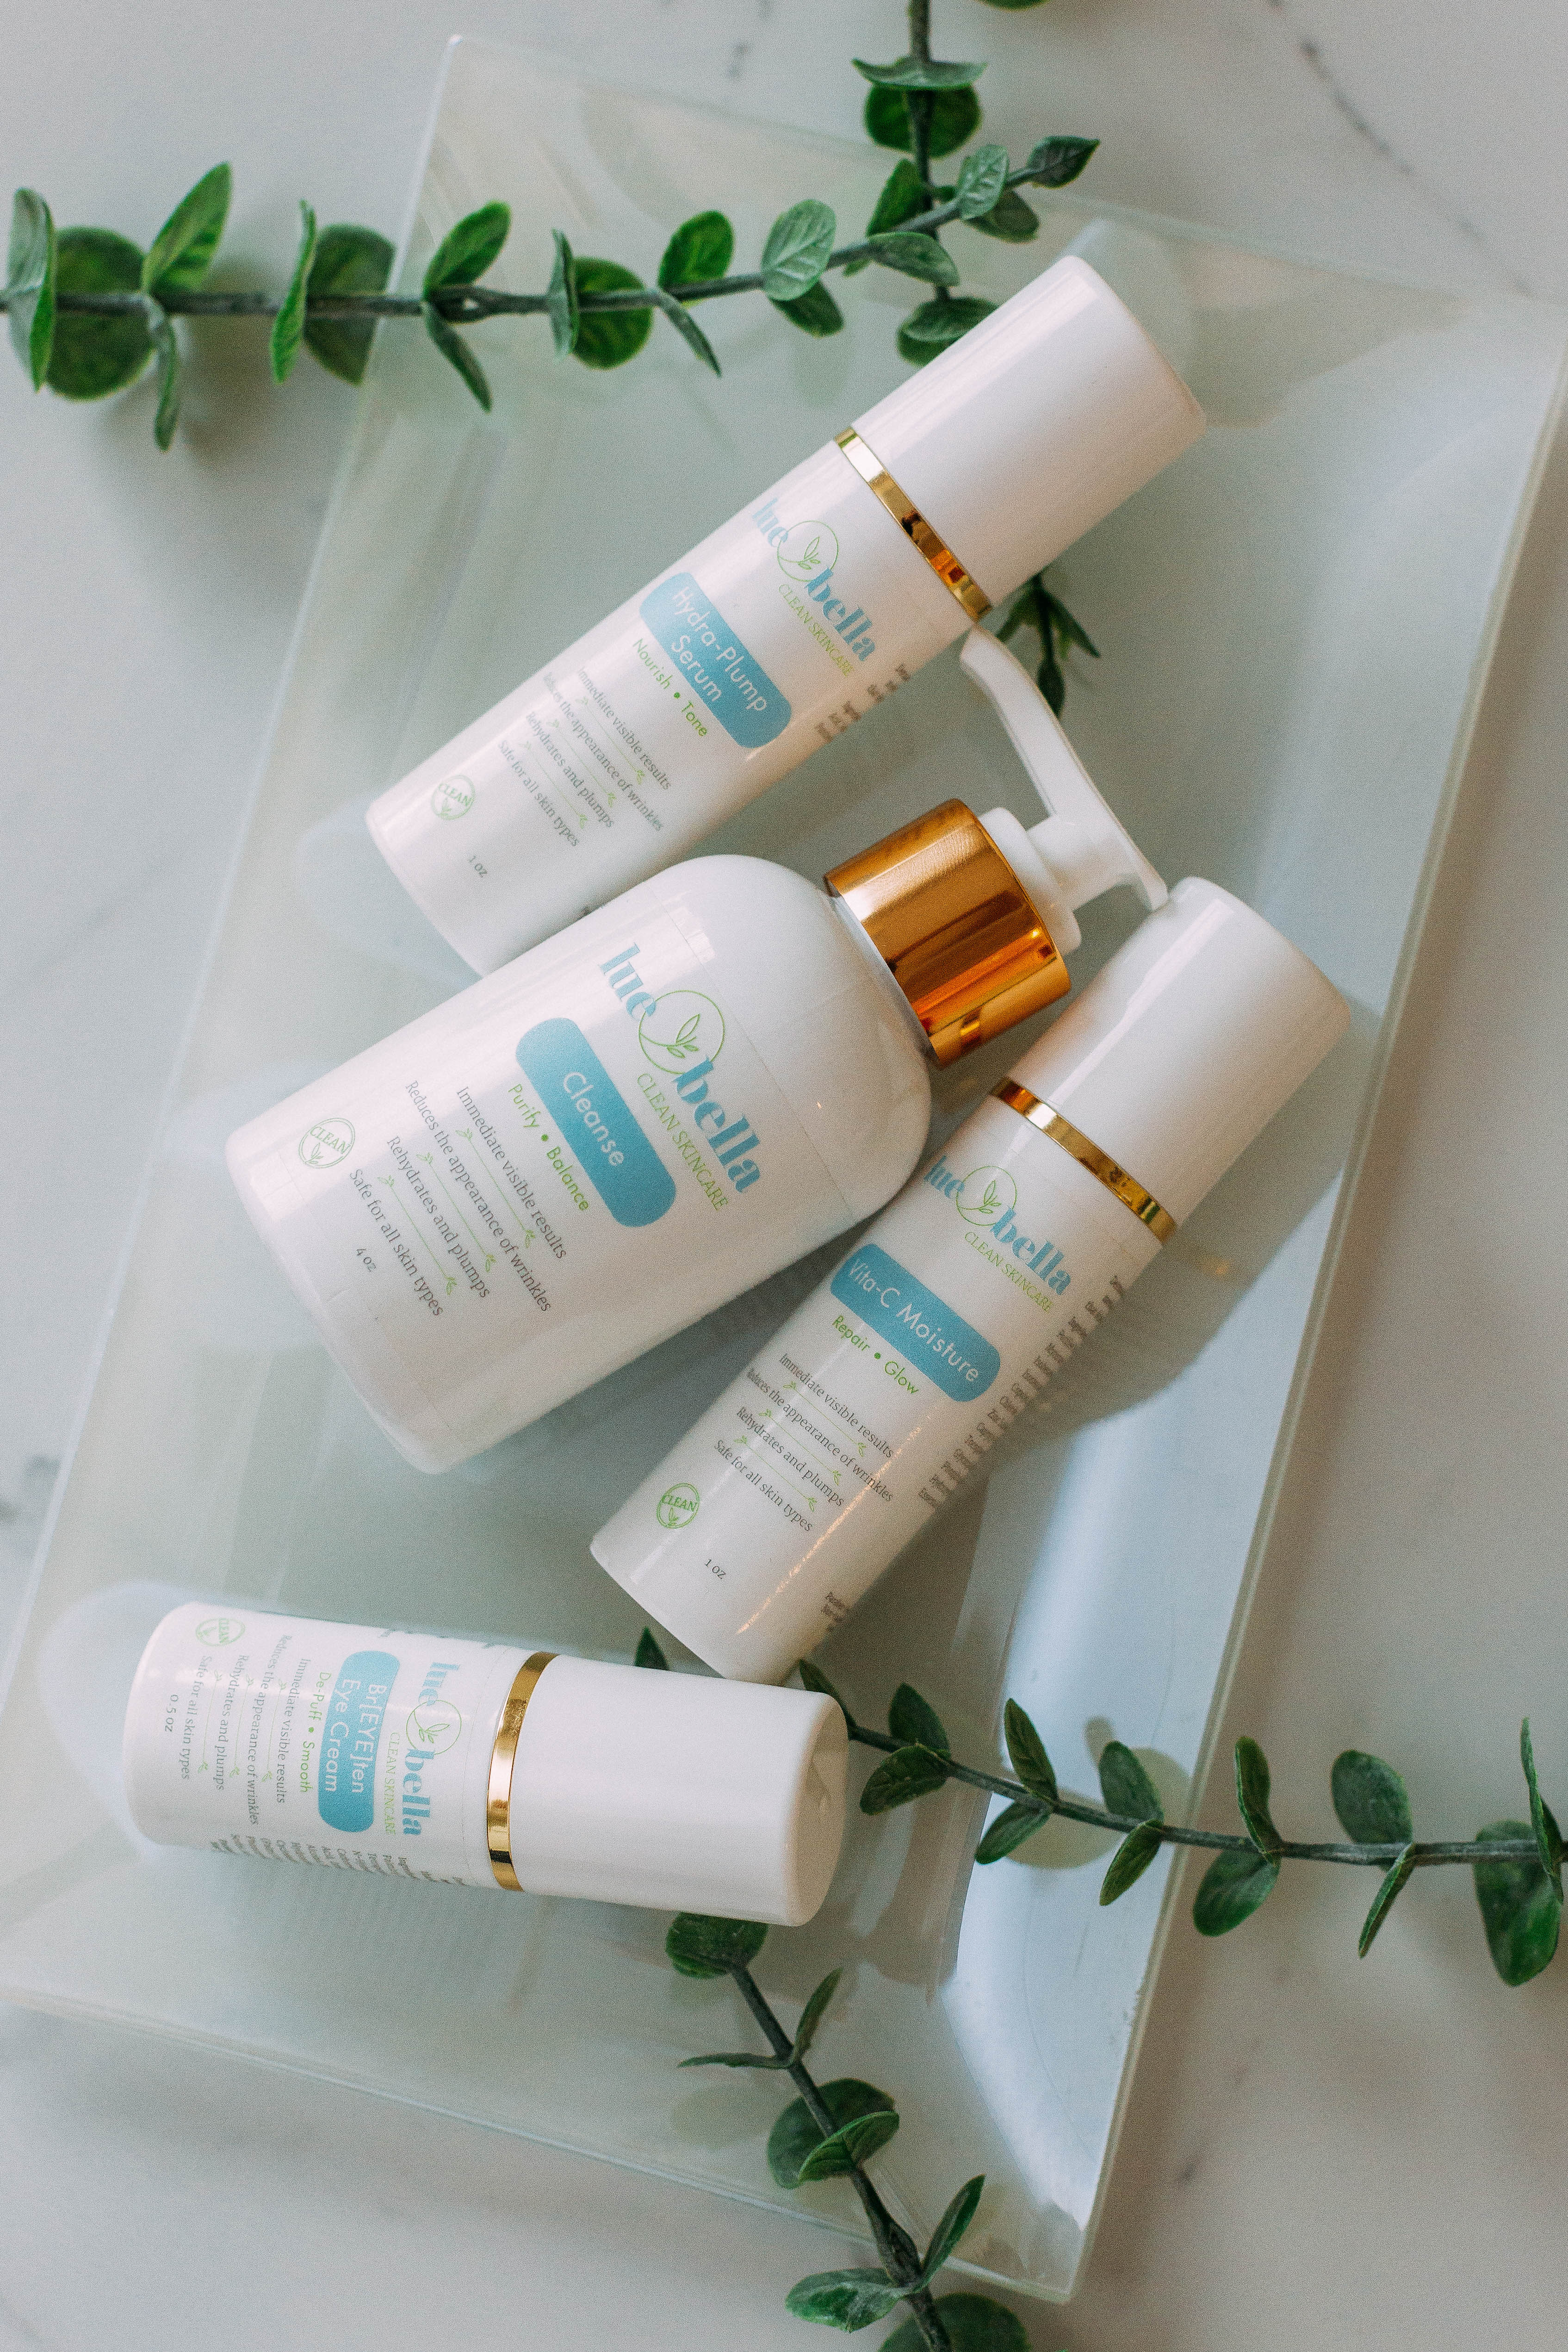 Say Hello to Beautiful Skin with Bonvera’s New Luebella Clean Skincare